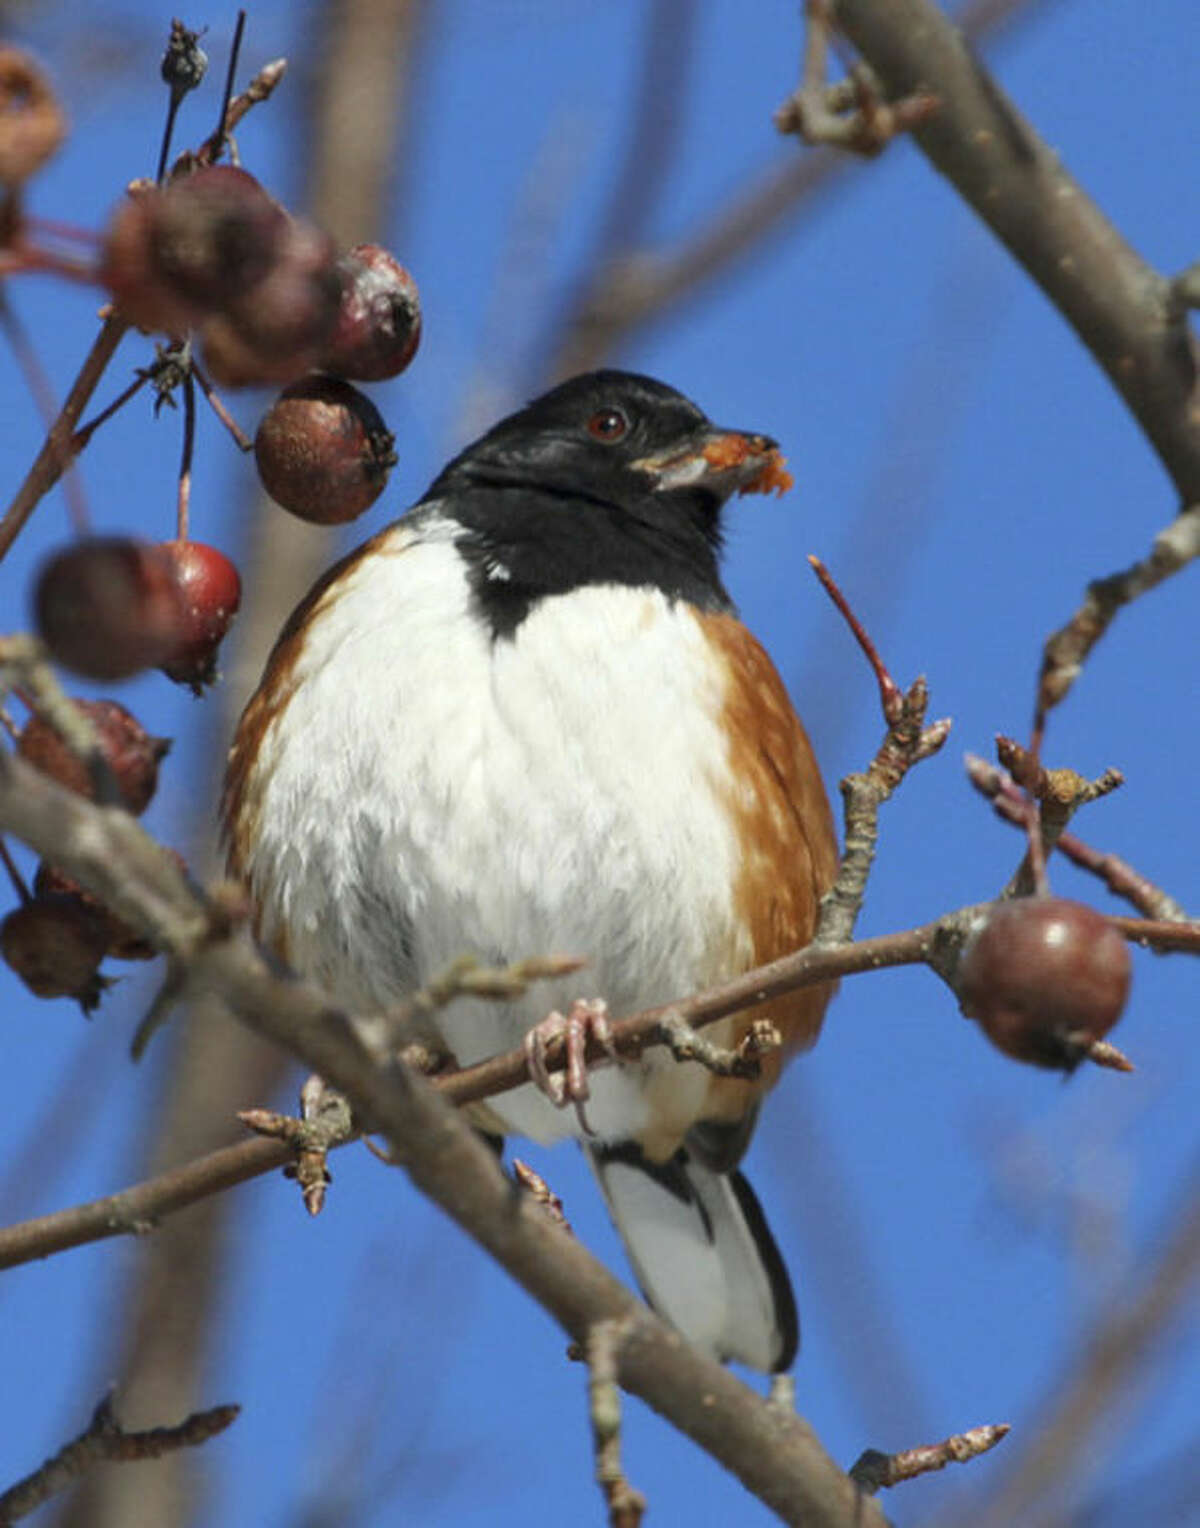 Photo by Chris Bosak An Eastern Towhee eats a crab apple during a cold winter day at Weed Beach in Darien, CT., Jan. 2014.